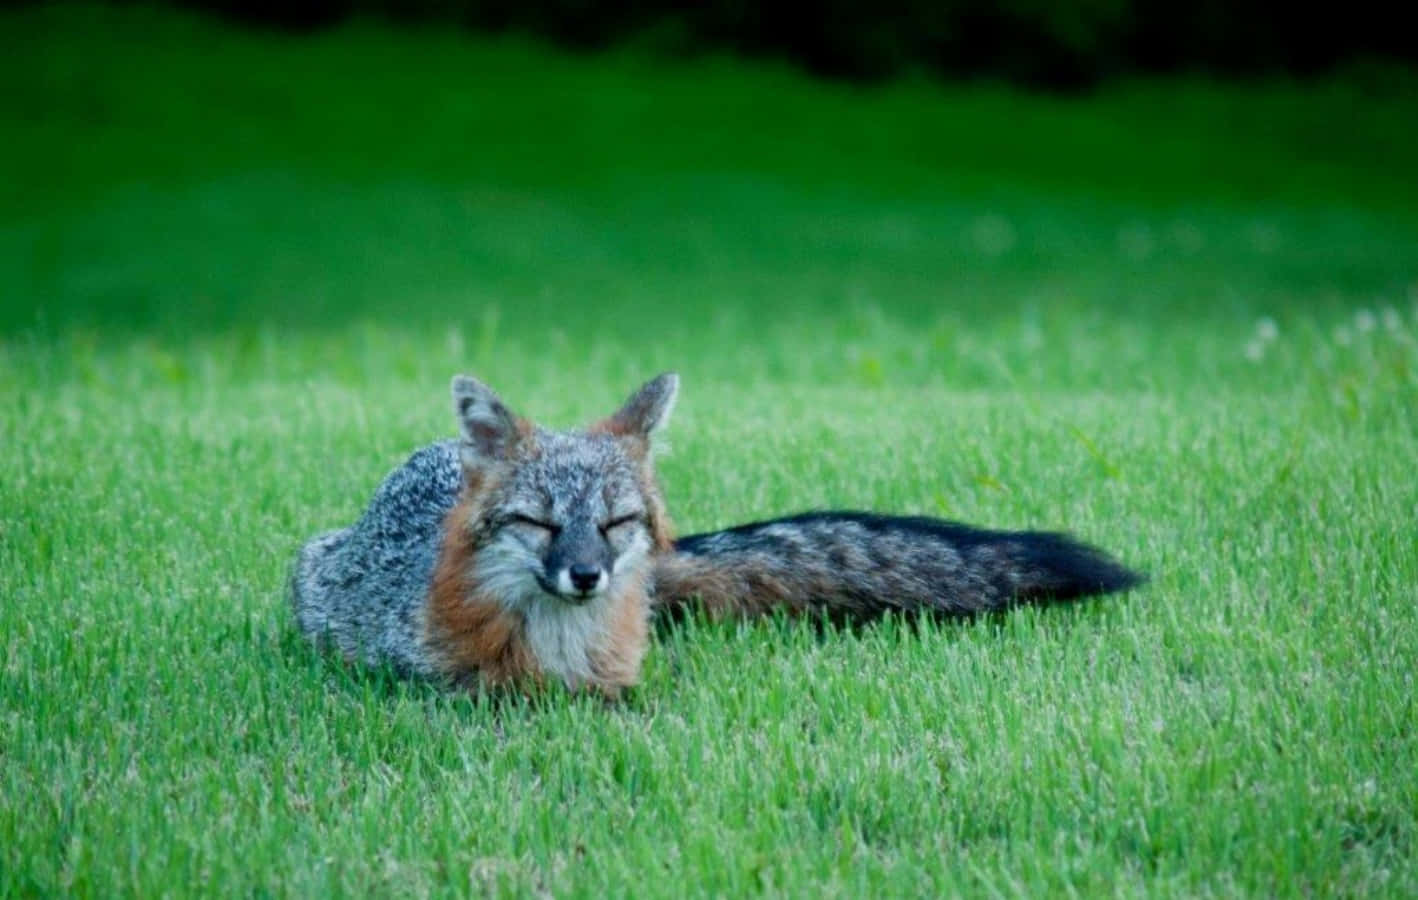 A Grey Fox Stops to Turn and Look